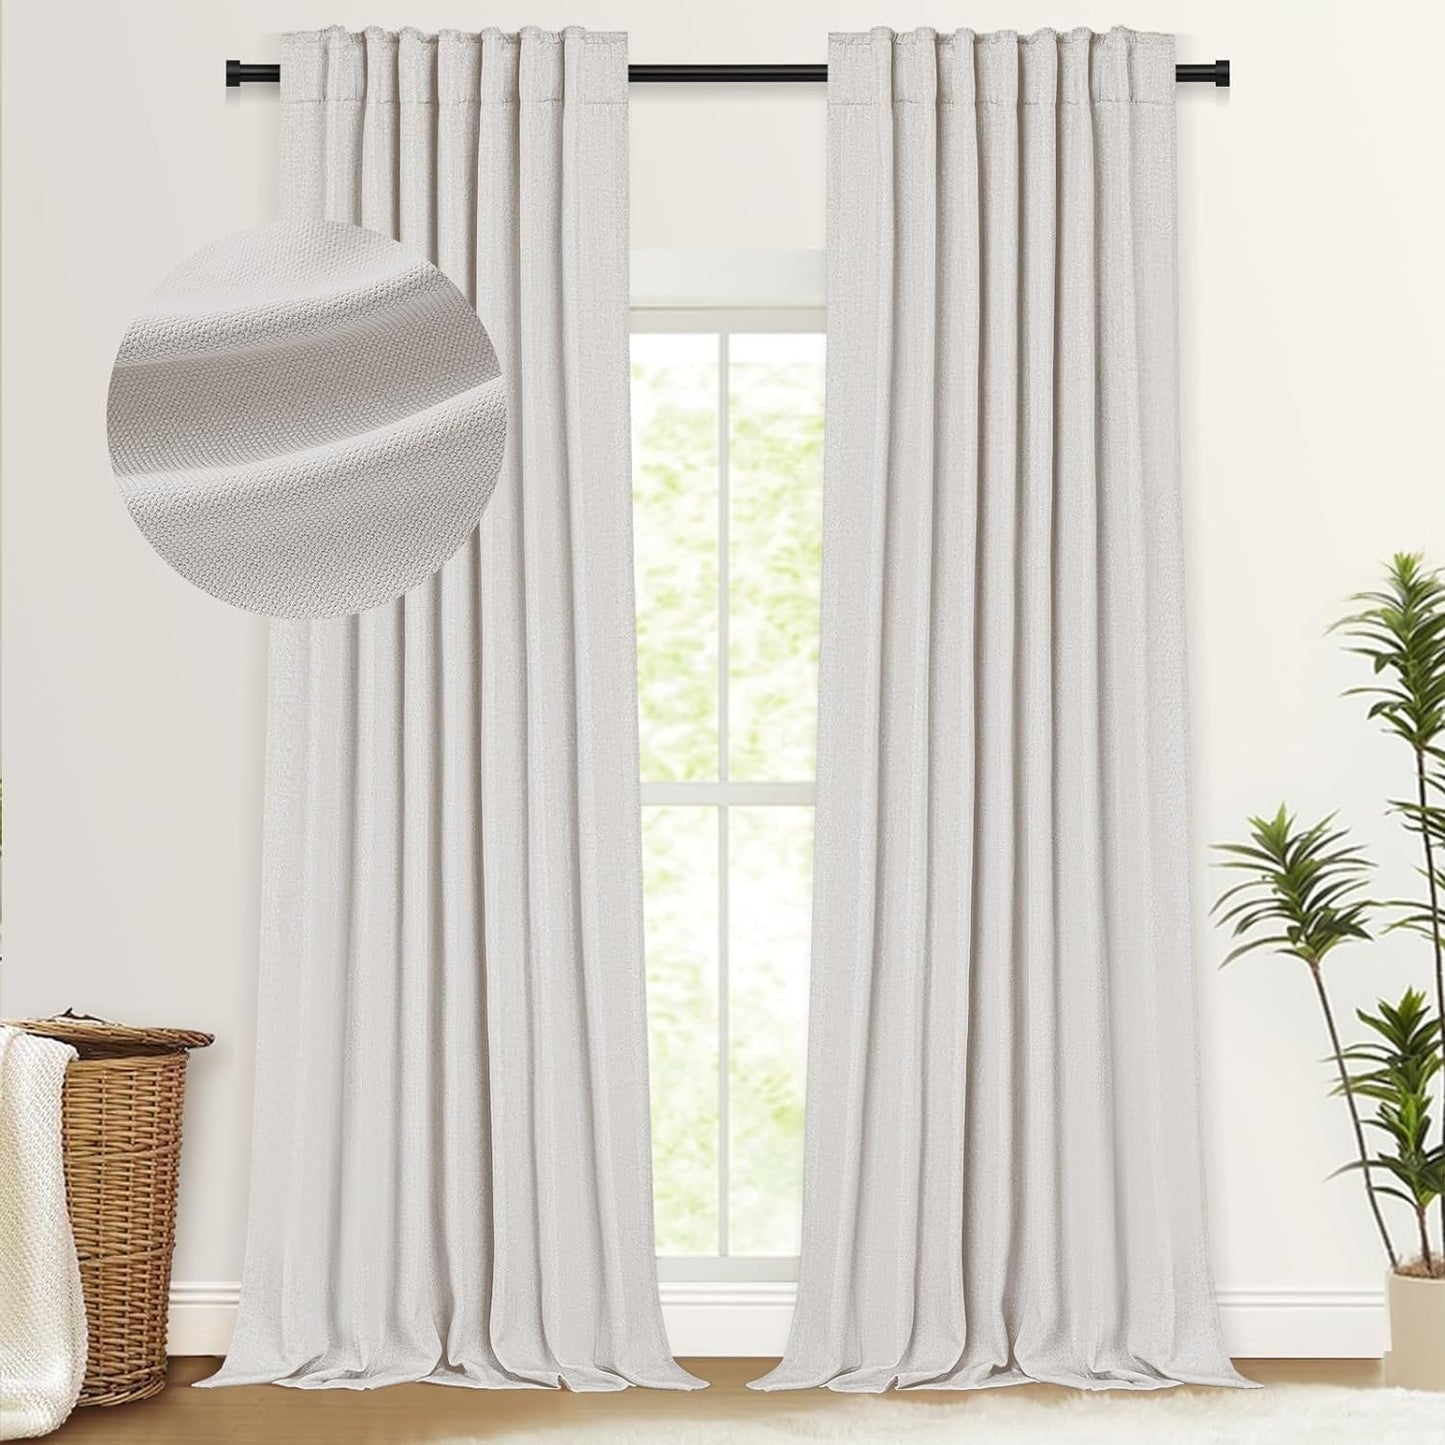 100% Blackout Shield Faux Linen Blackout Curtains for Bedroom 84 Inch Length 2 Panels Set, Cream Curtains with Back Tab/Rod Pocket, Thermal Insulated Drapes for Living Room, 50" W X 84" L, Cream  100% Blackout Shield Beige 50''W X 120''L 